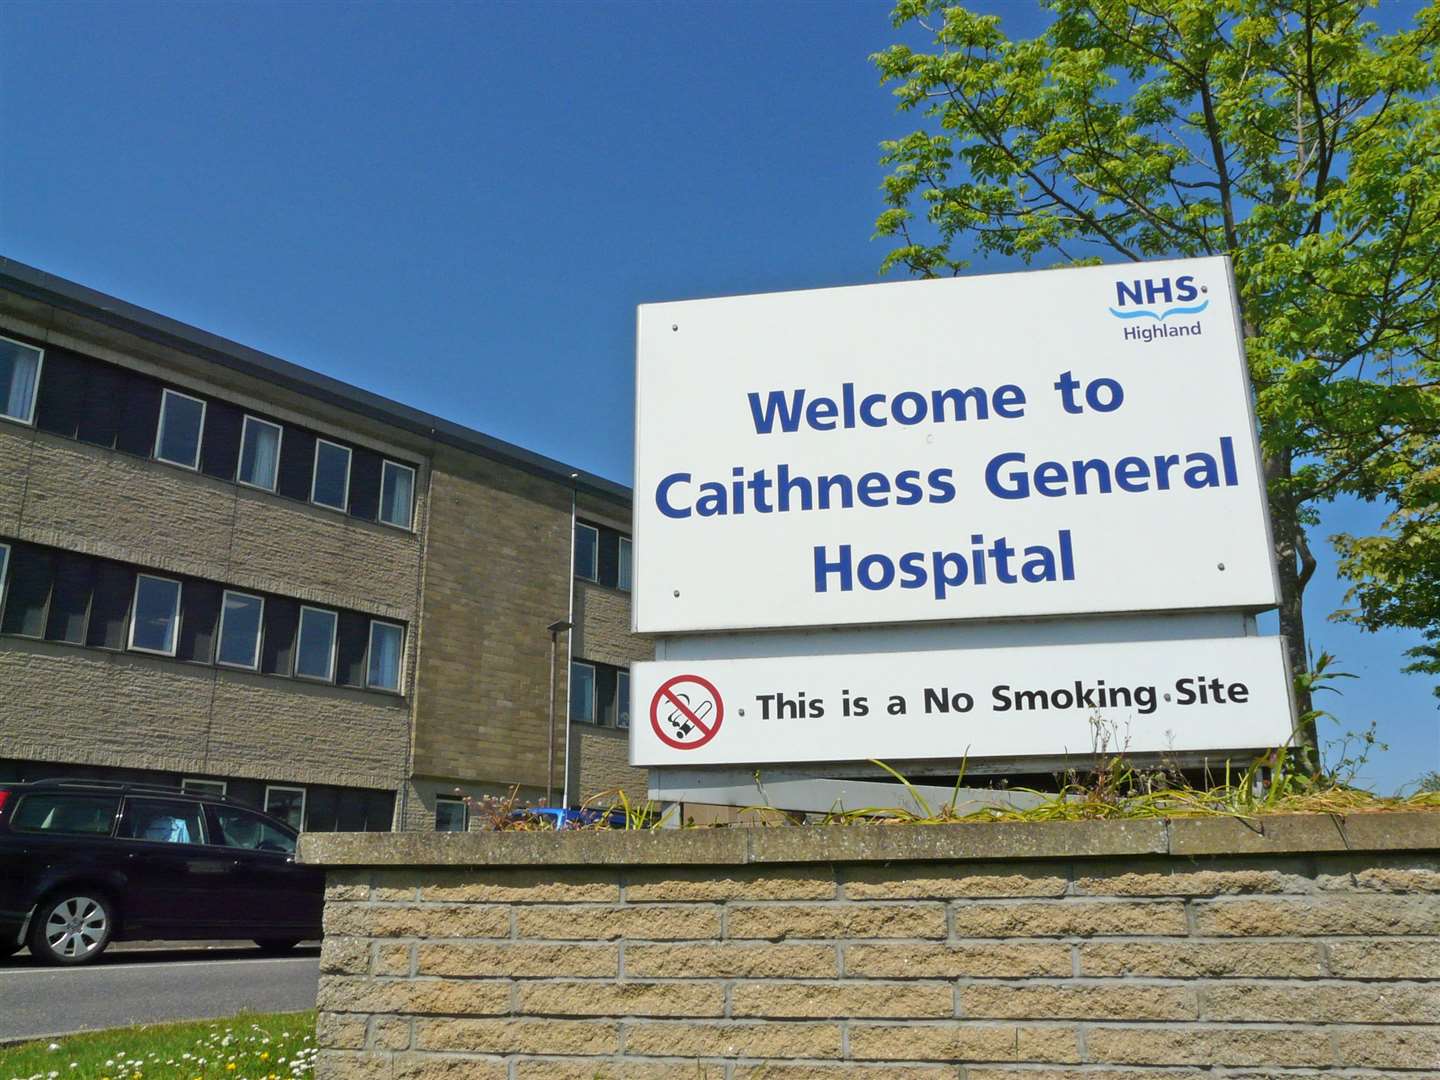 Caithness General Hospital received the Alliance of Water Stewardship standard for work it carried out to reduce the impact of pharmaceuticals on the environment.